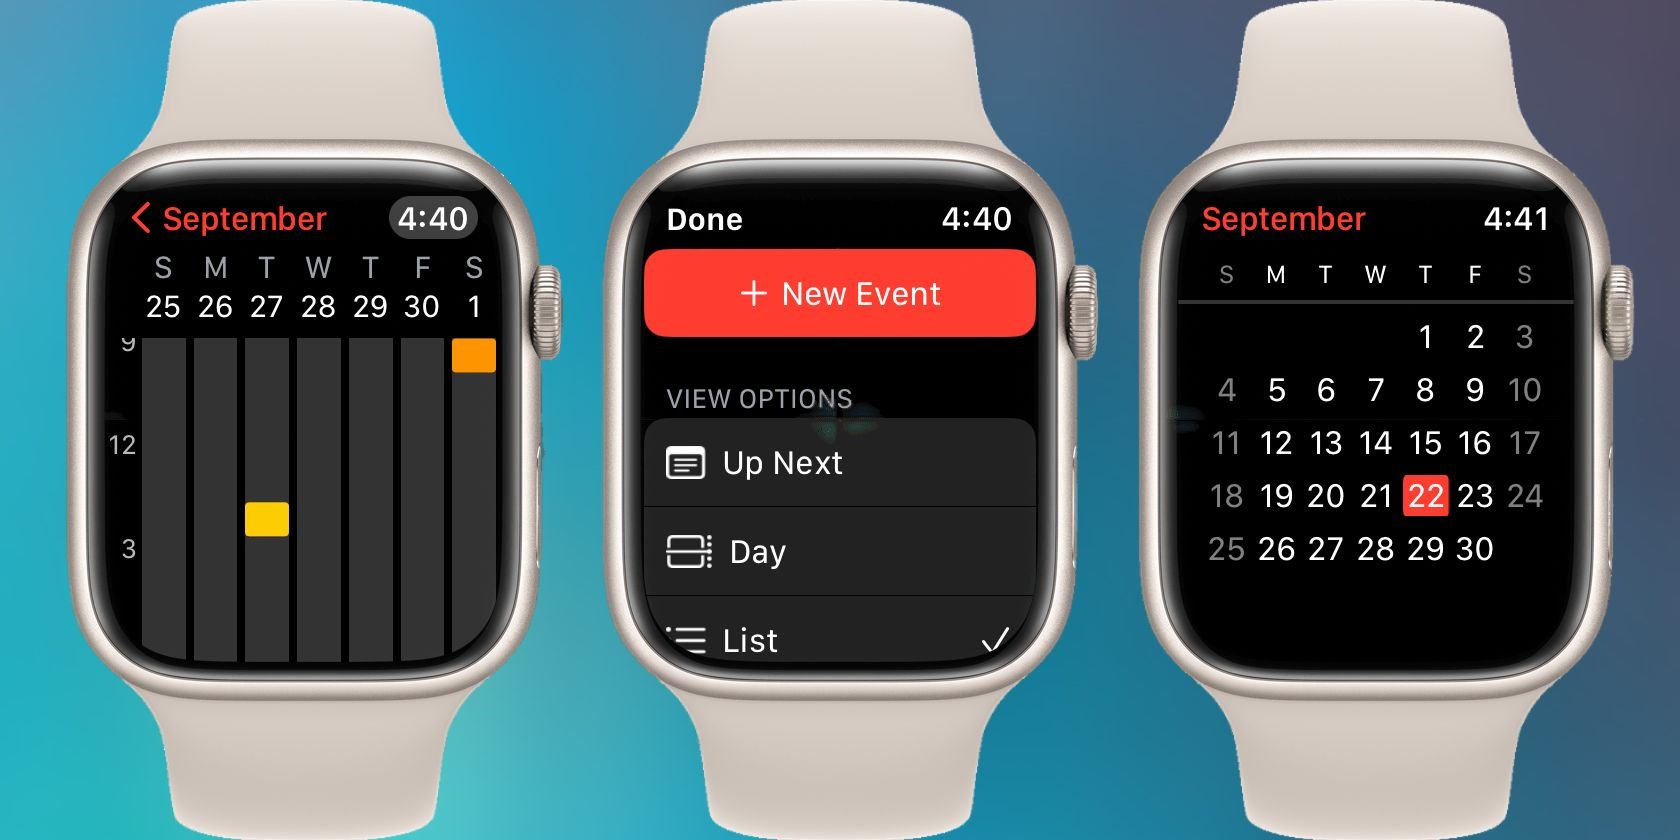 How to Use the Calendar App on Your Apple Watch